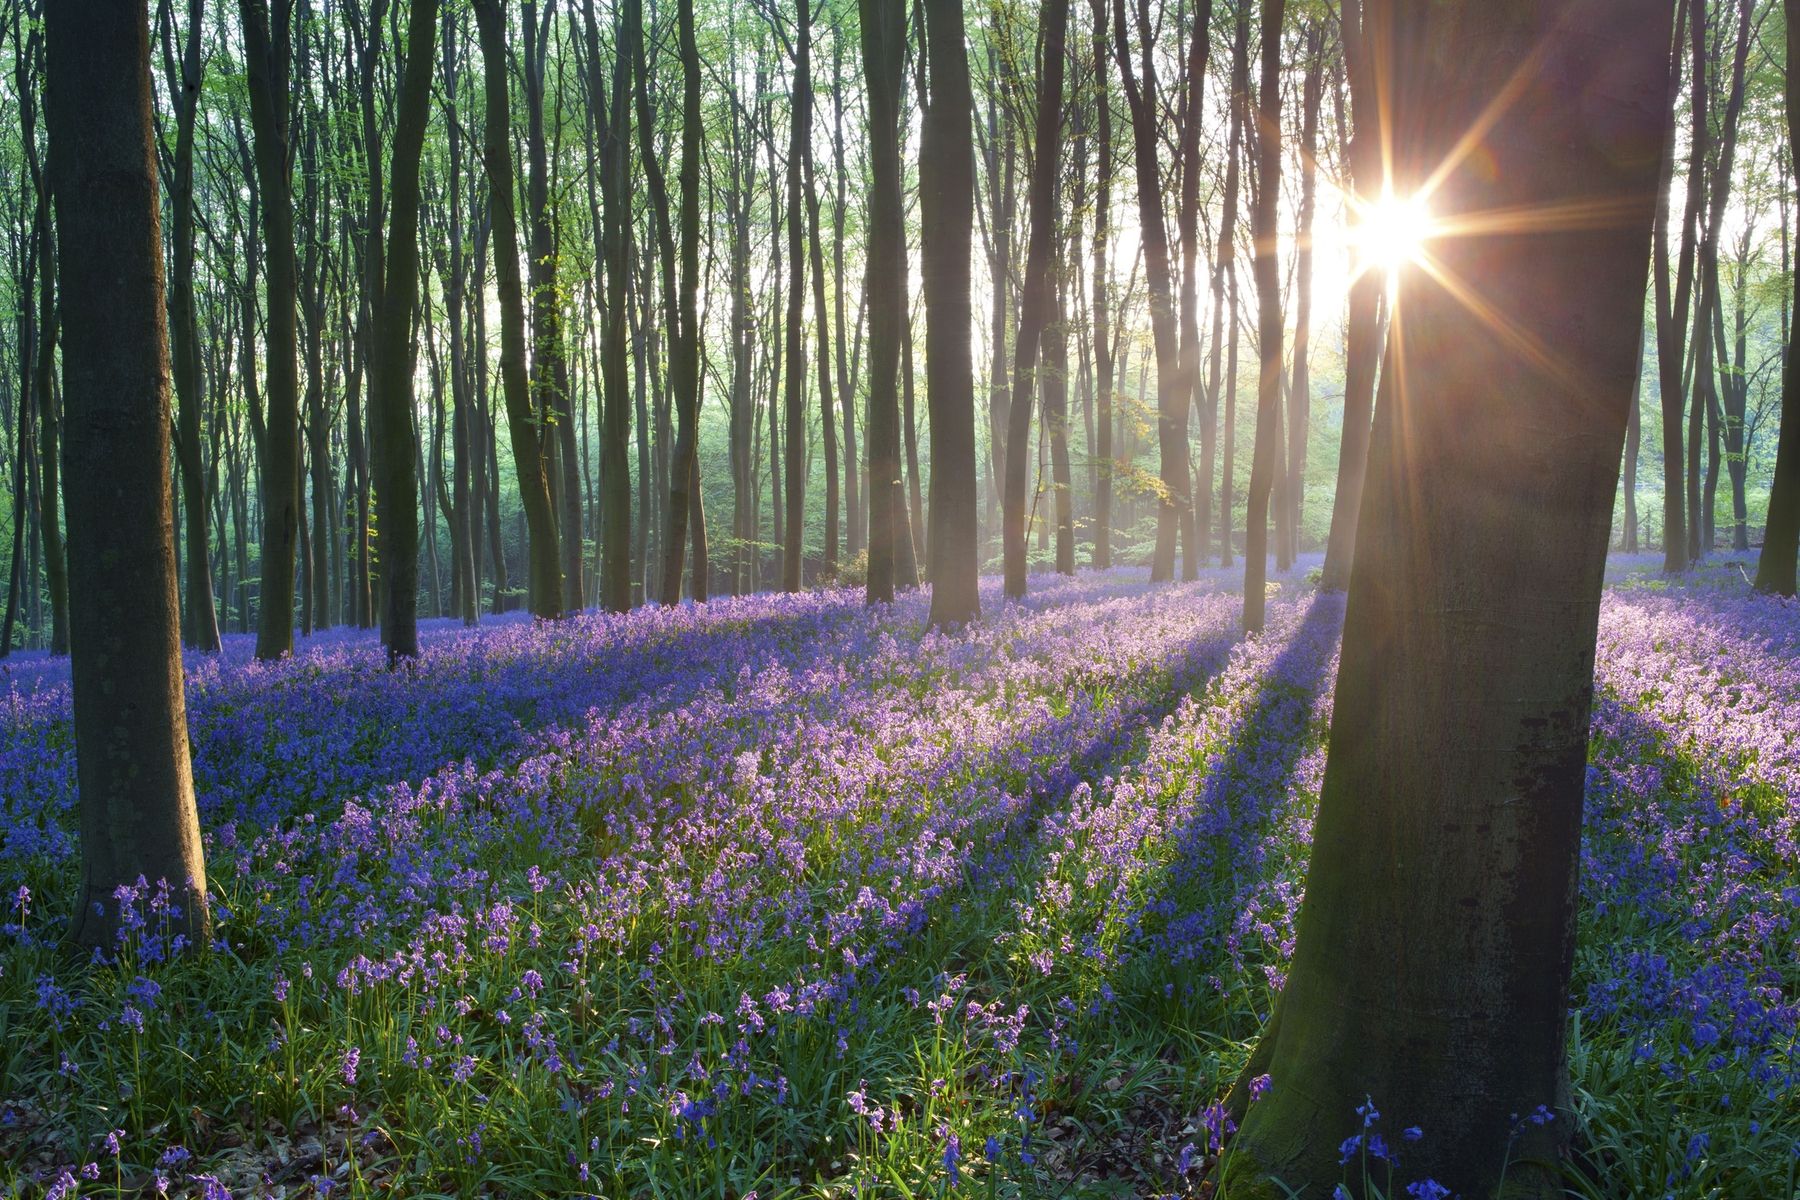 Buy Bluebell woods wall mural US shipping at Happywall.com